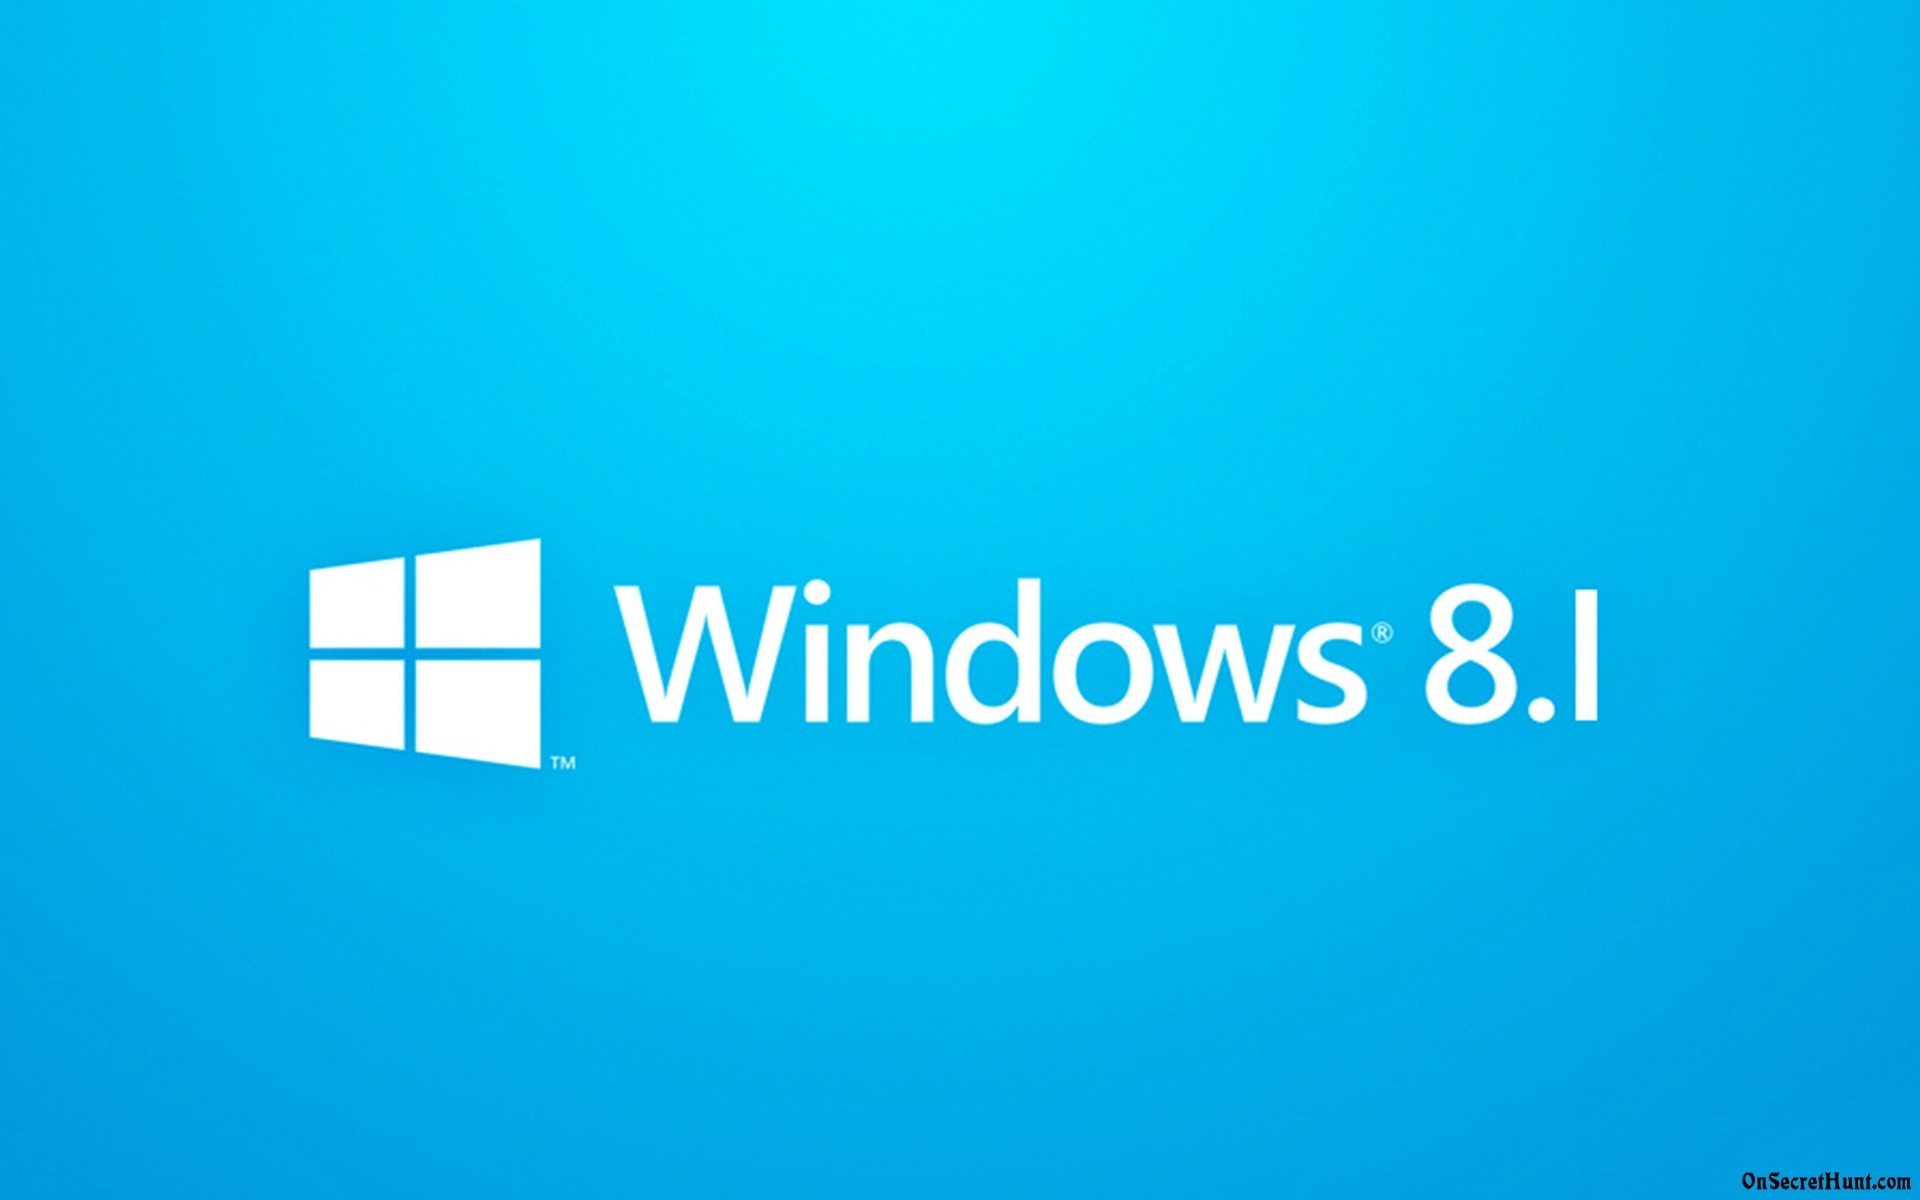 Awesome Windows 8.1 White And Blue HD Wallpaper Image Desktop